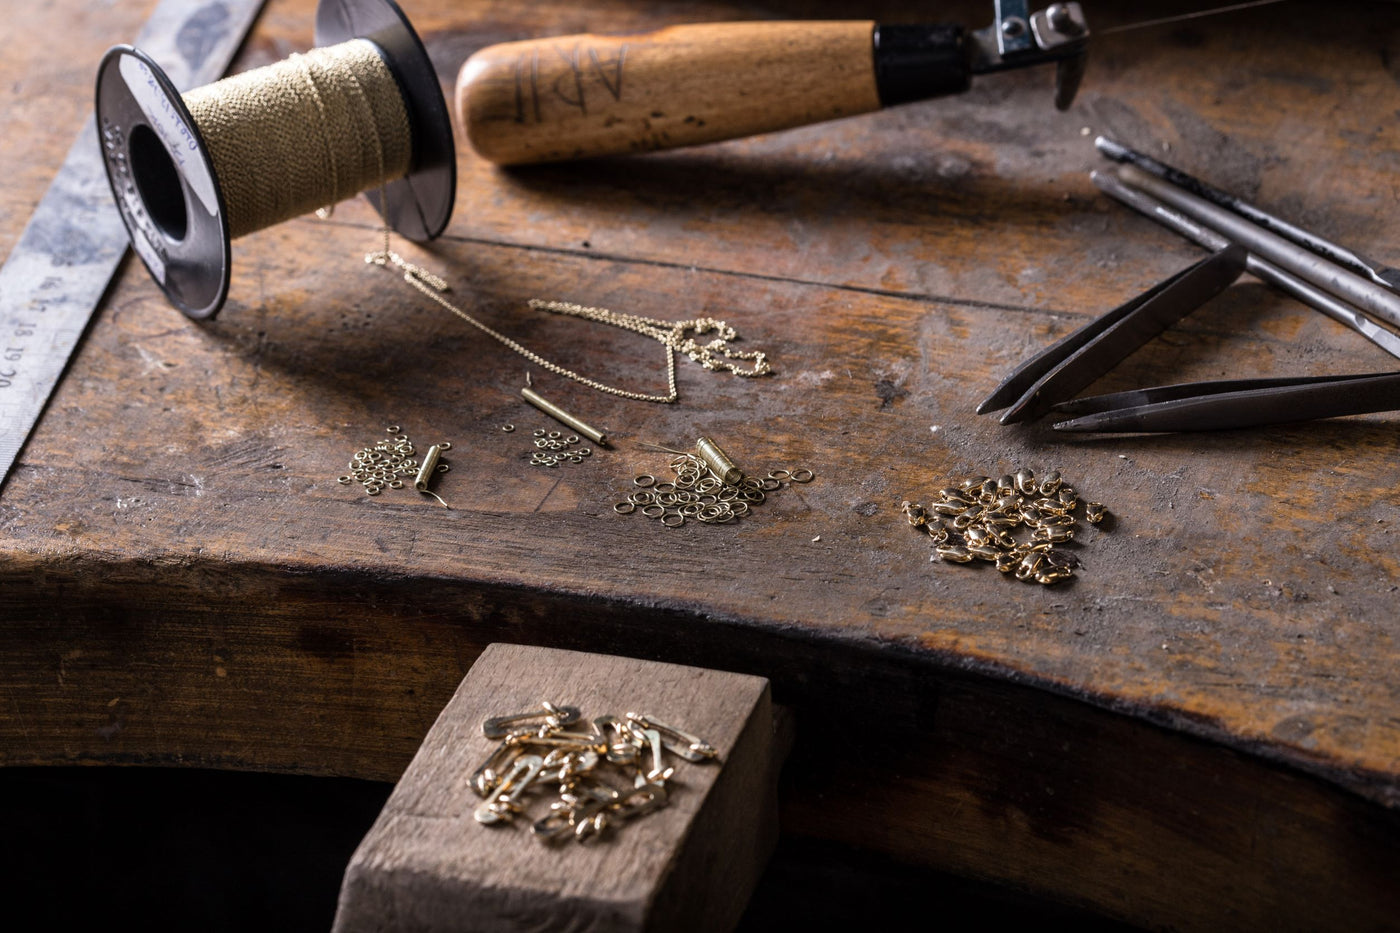 How is recycled gold used to create sustainable jewellery?